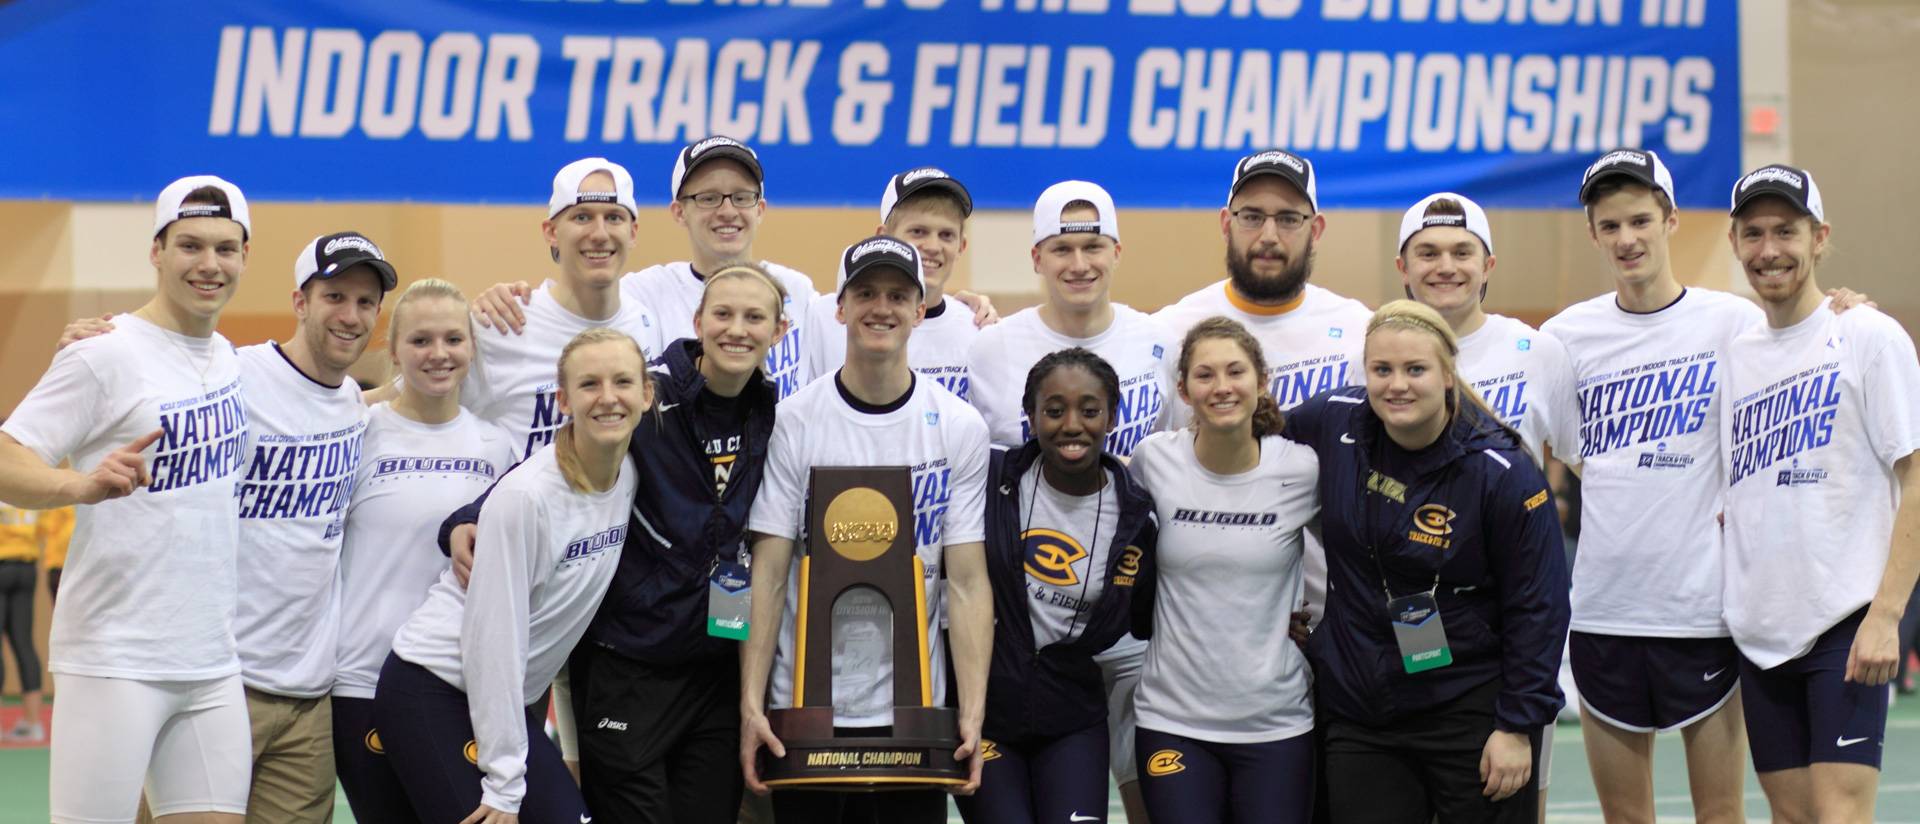 Blugold men's track and field team